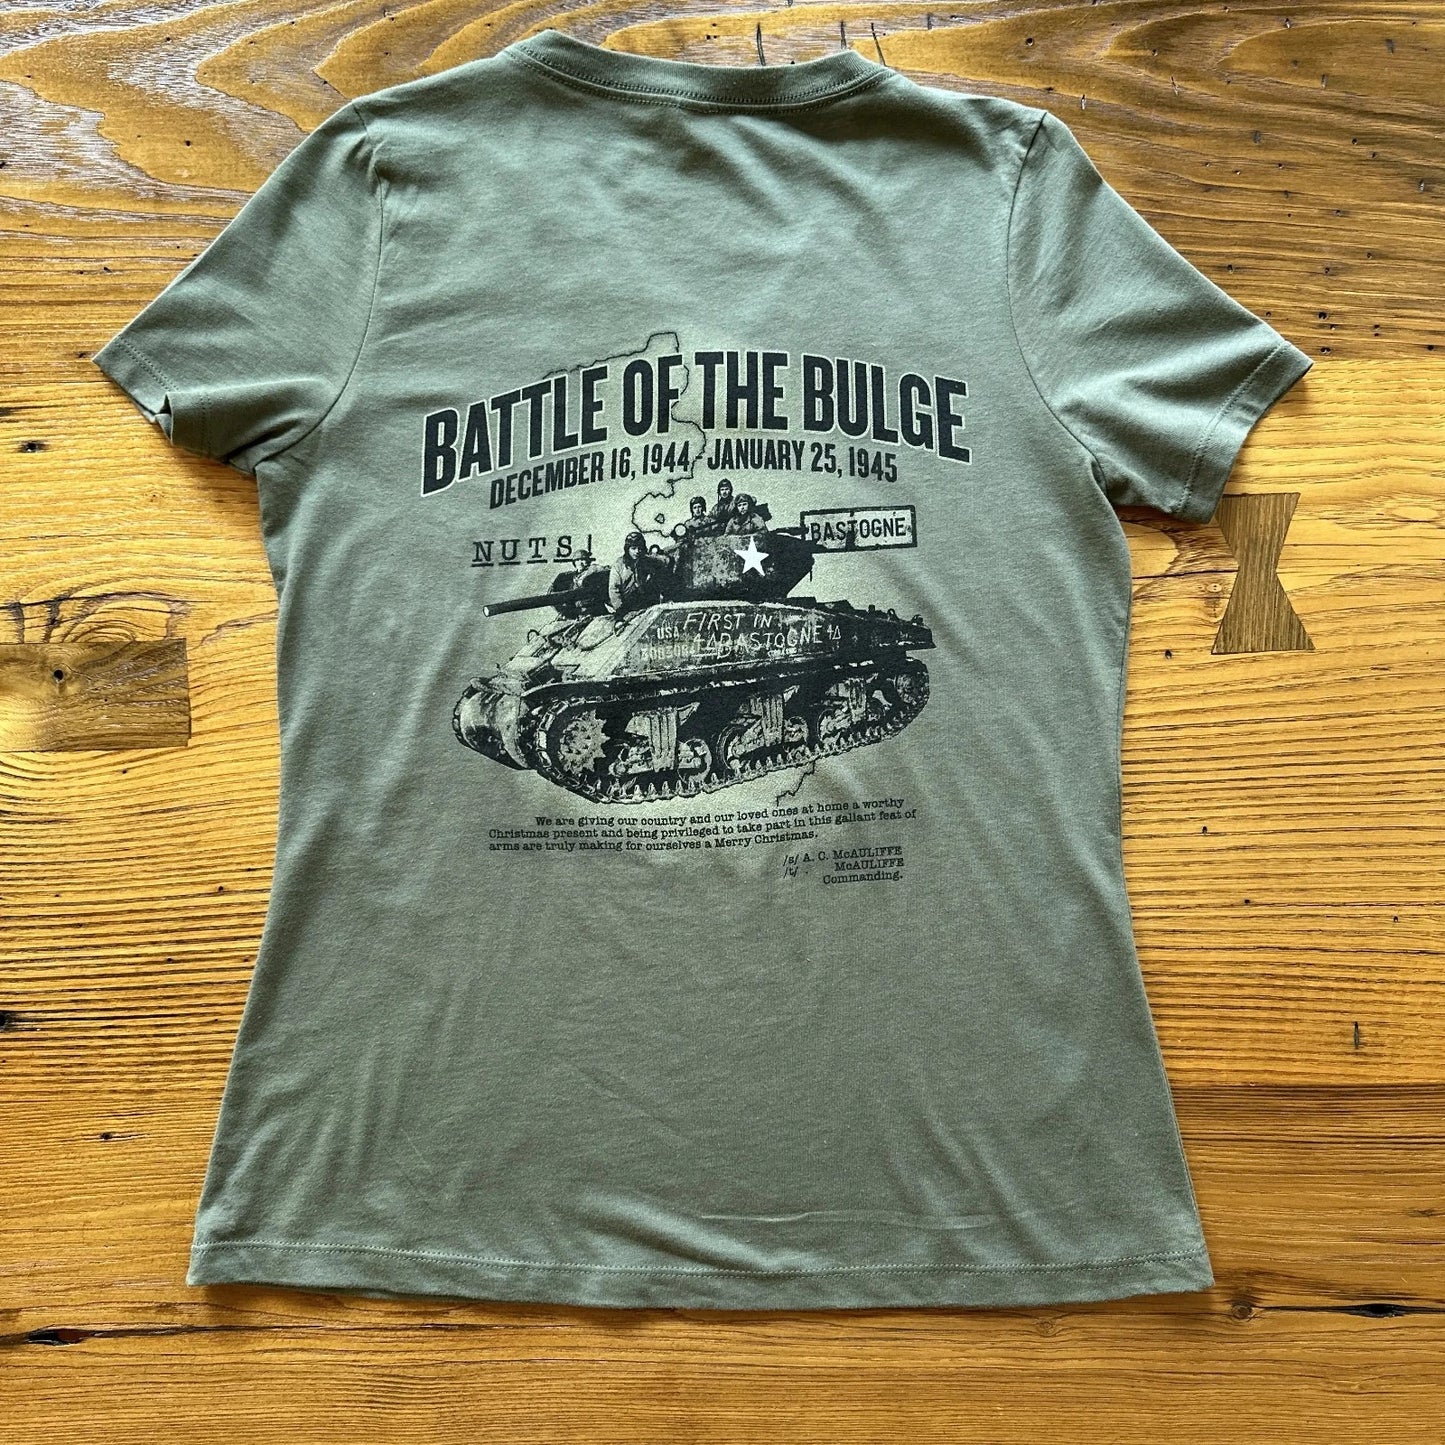 Back of The Battle of the Bulge Women's v-neck shirt from The History List store